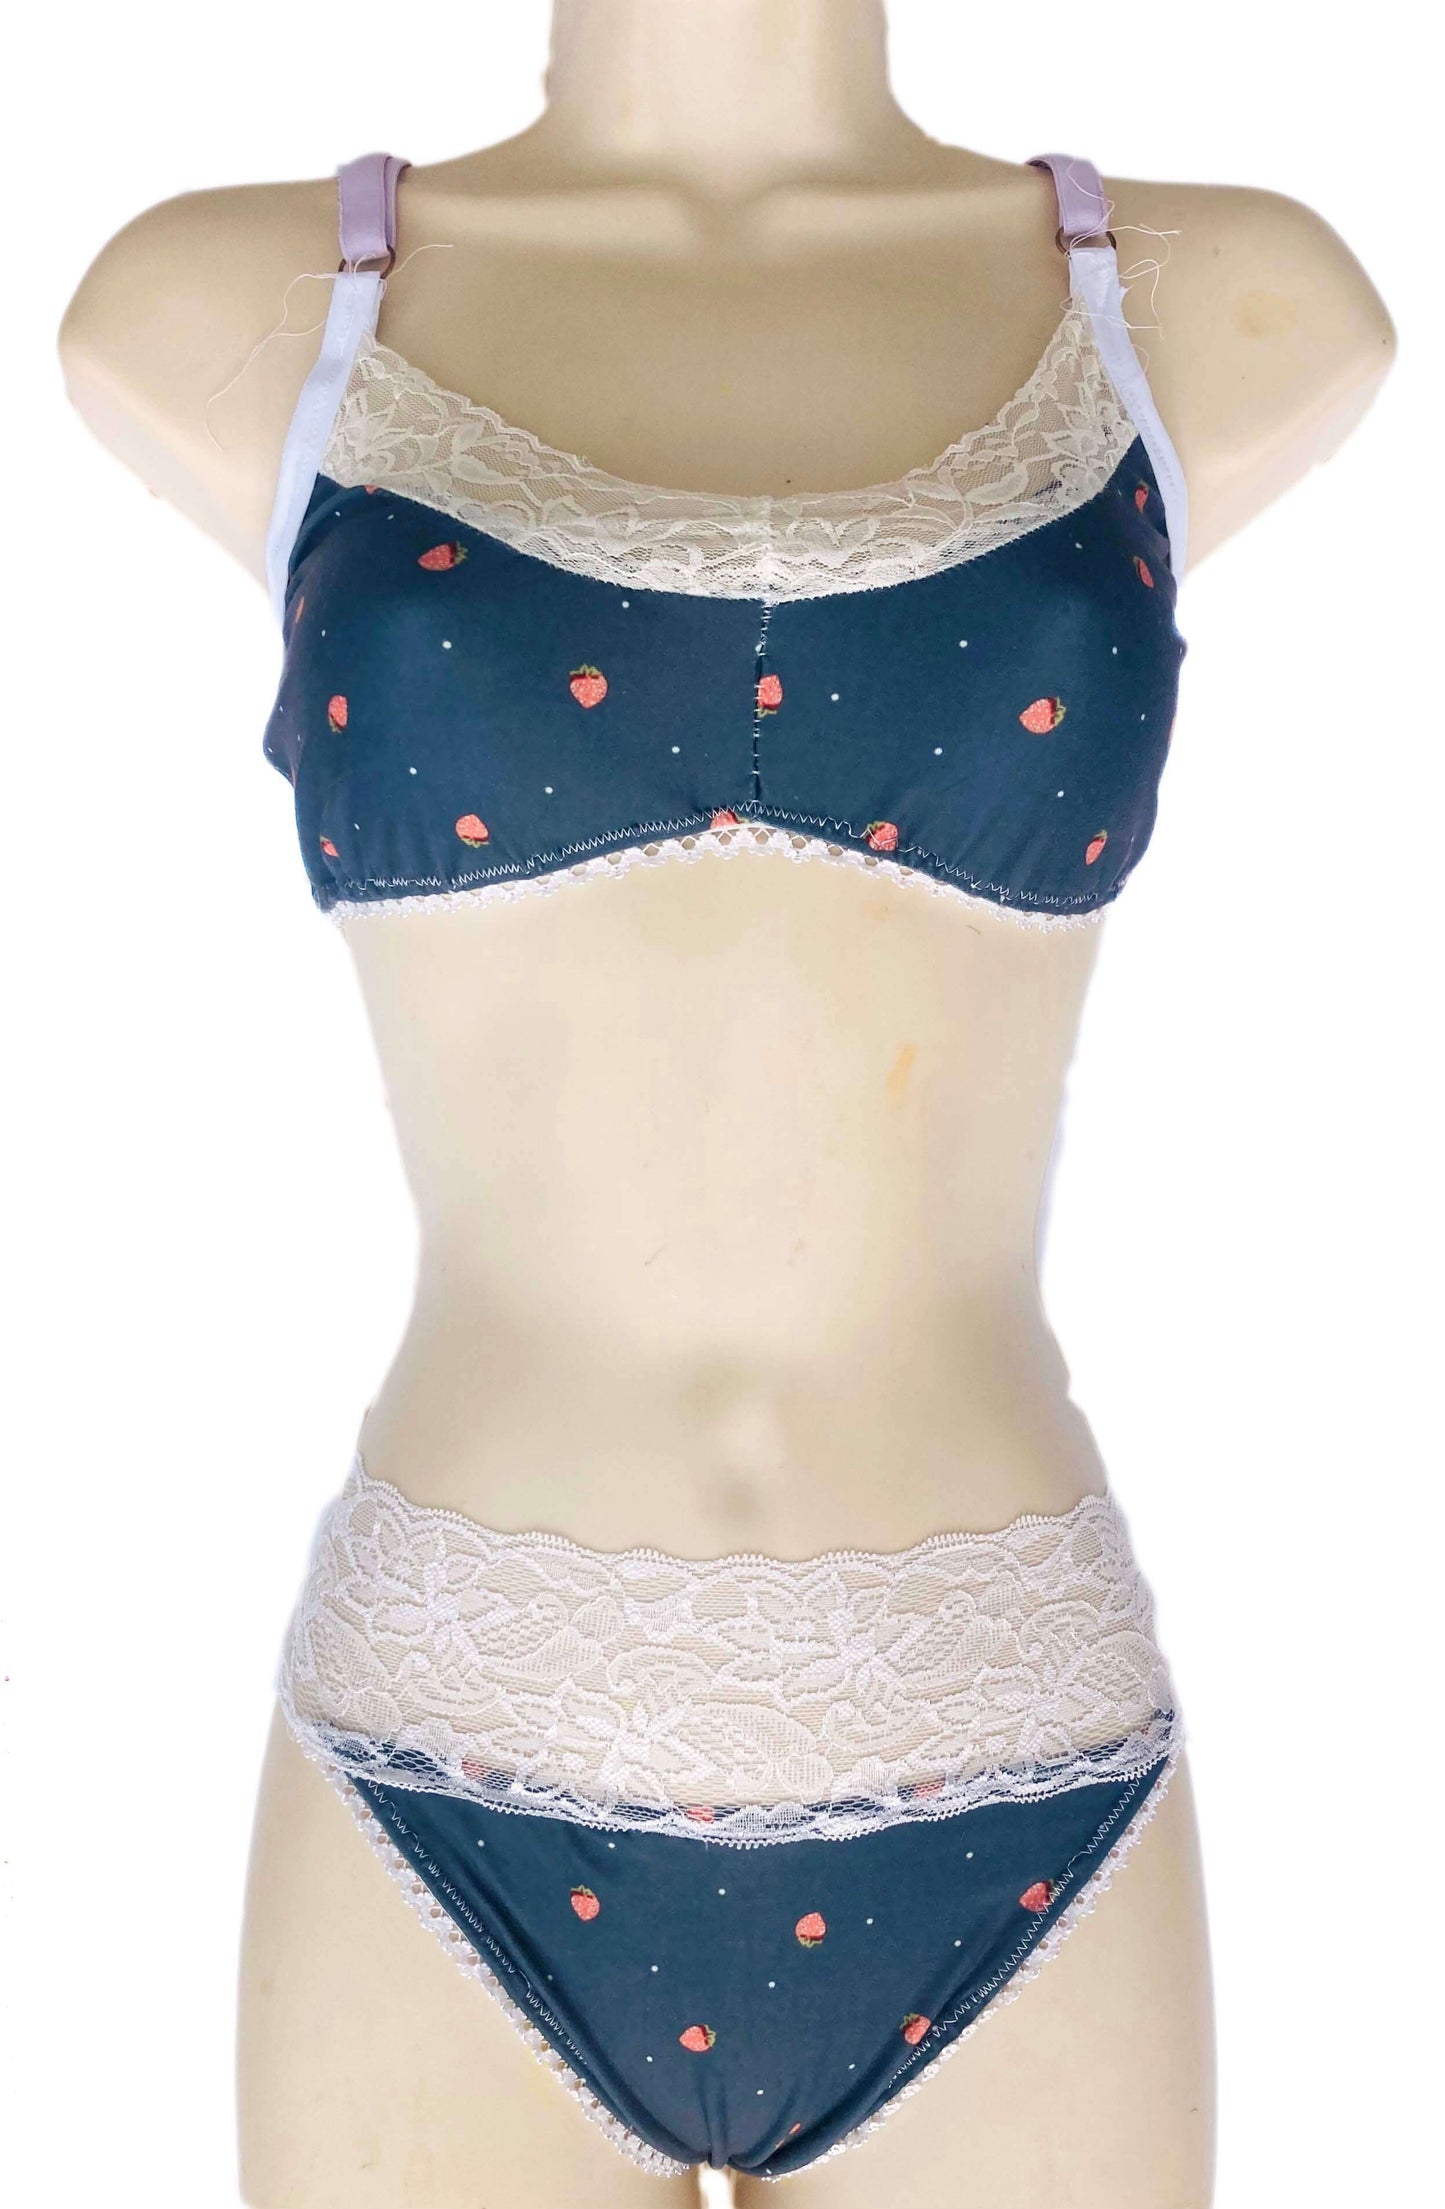 unique lingerie with tiny strawberries on manniquin